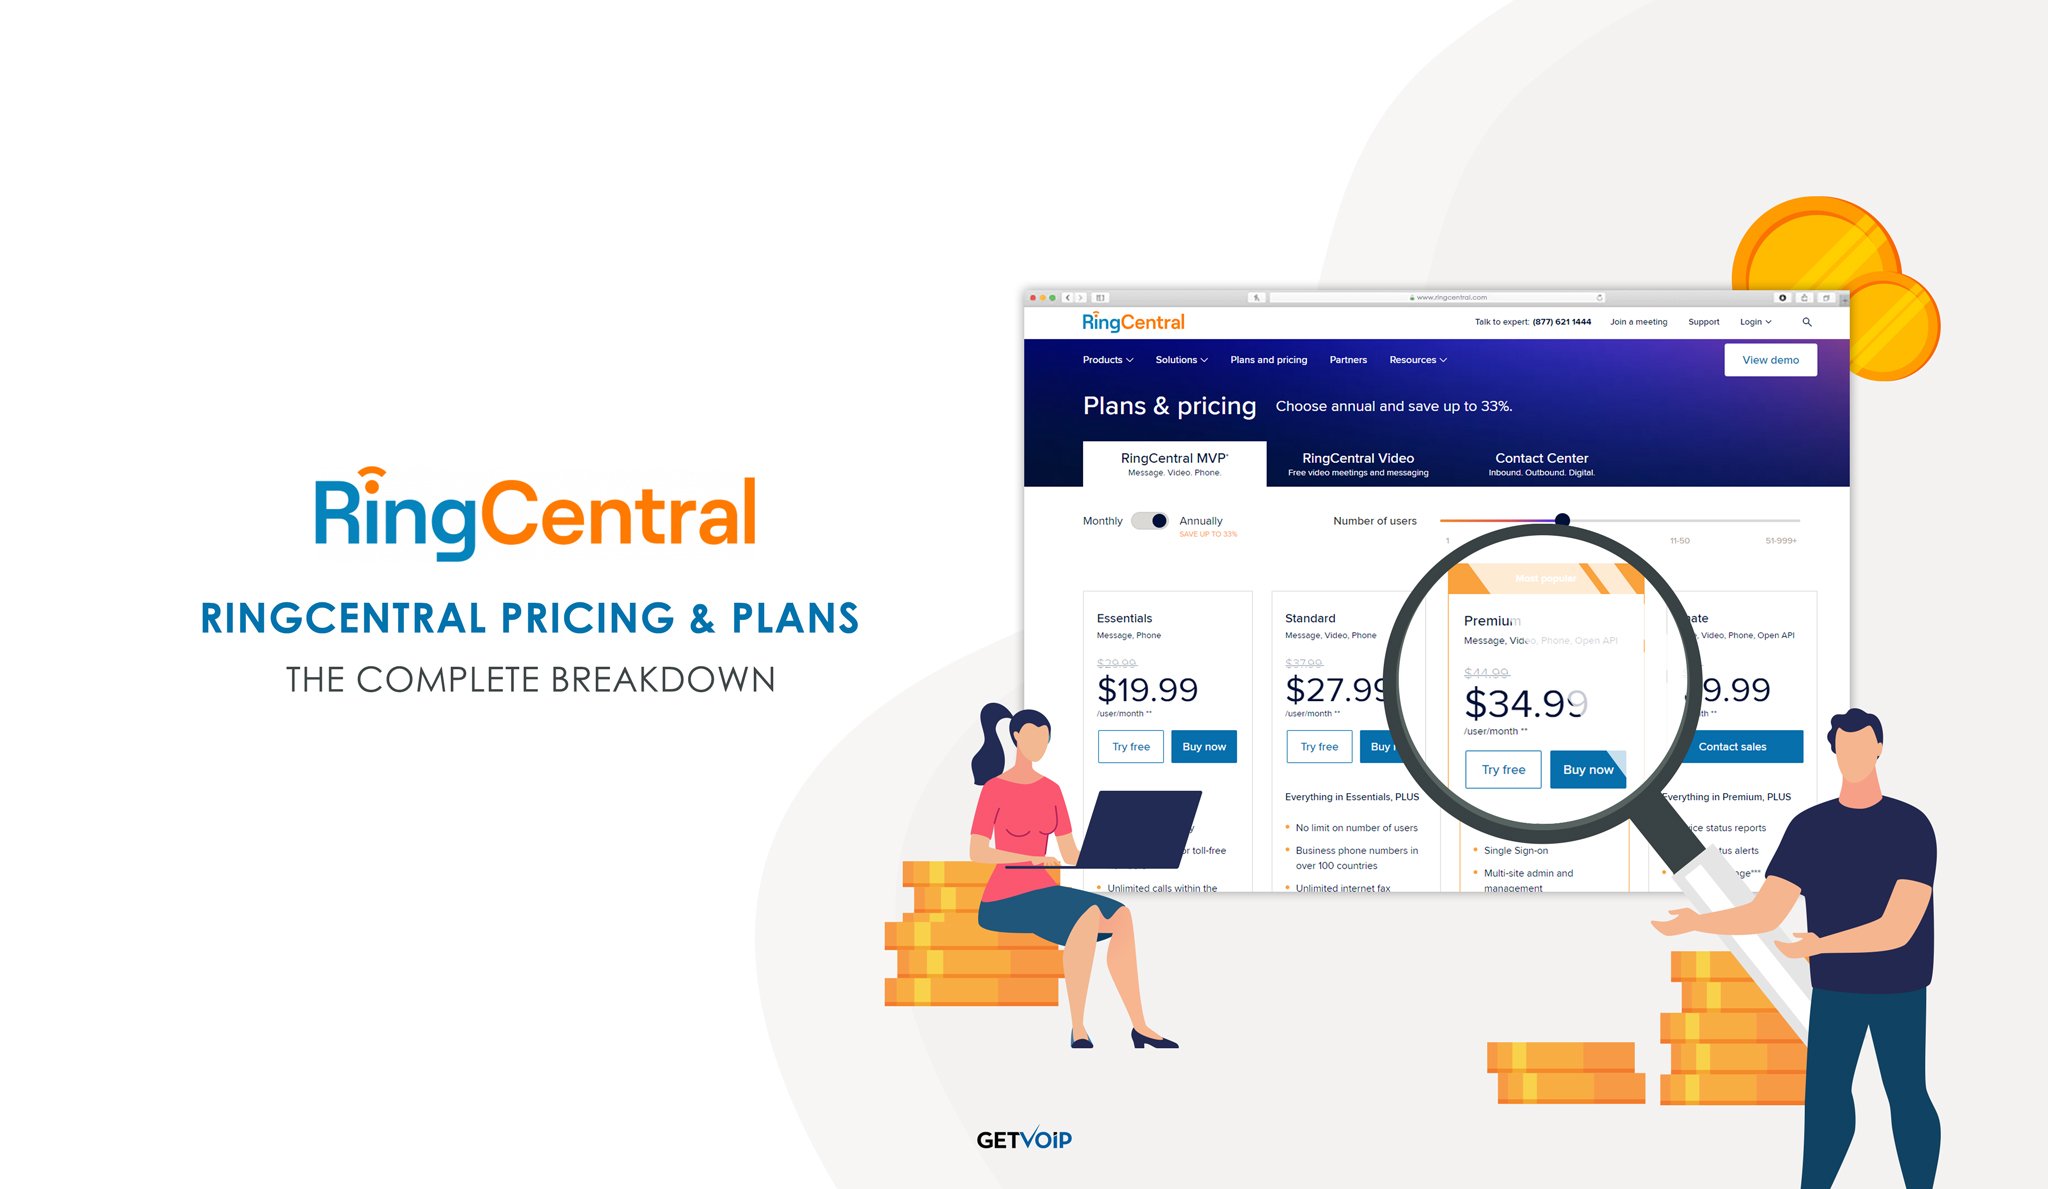 RingCentral Pricing & Plans in 2021: The Complete Breakdown